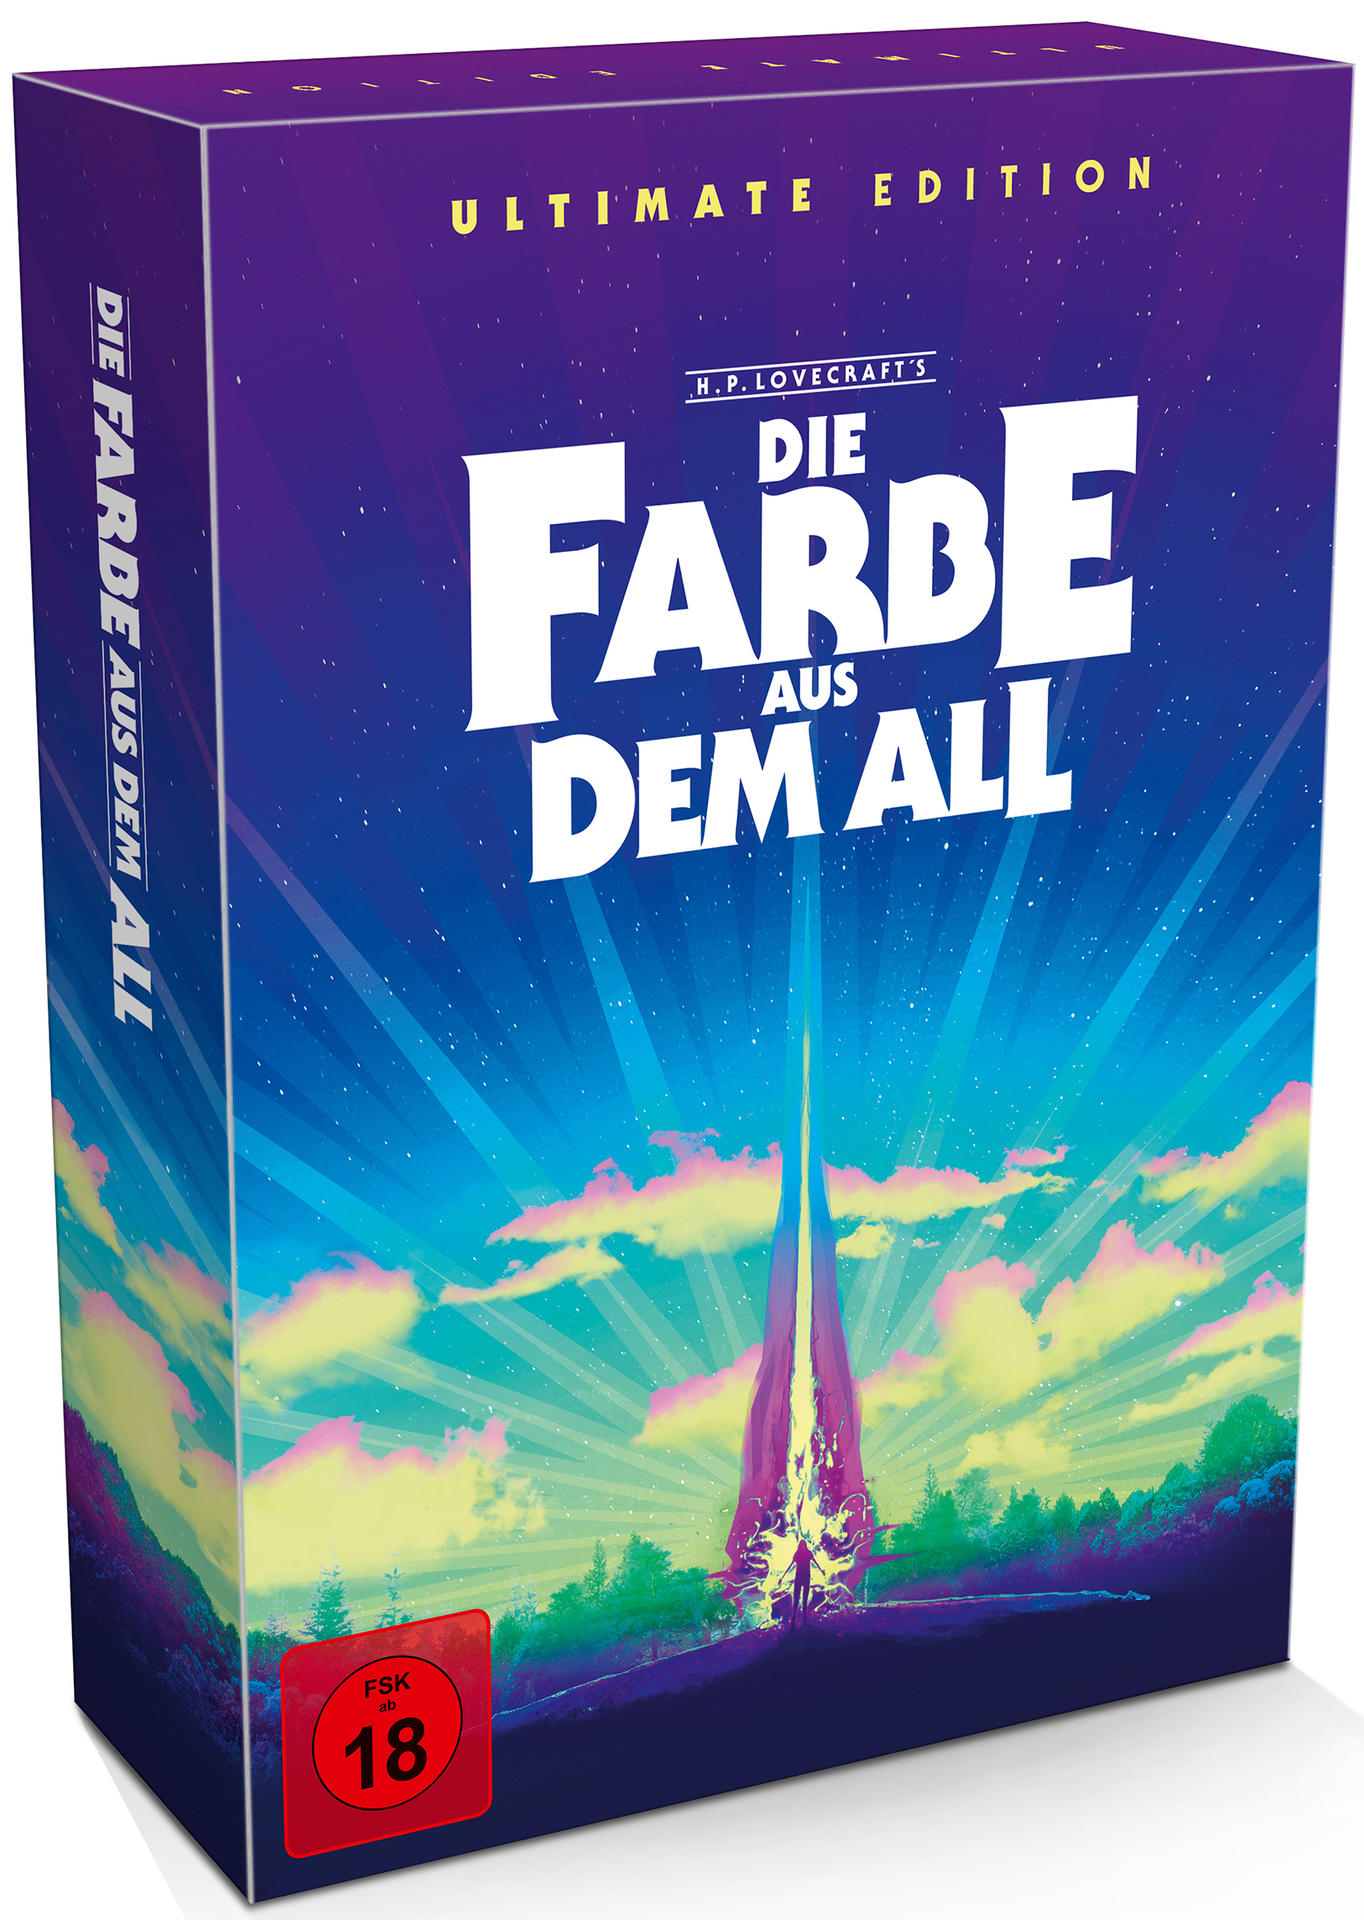 Color Blu-rays 5 Blu-ray (Ultimate UHD CD) HD 4K Out Space All Die dem + Edition, of aus - Ultra + Farbe